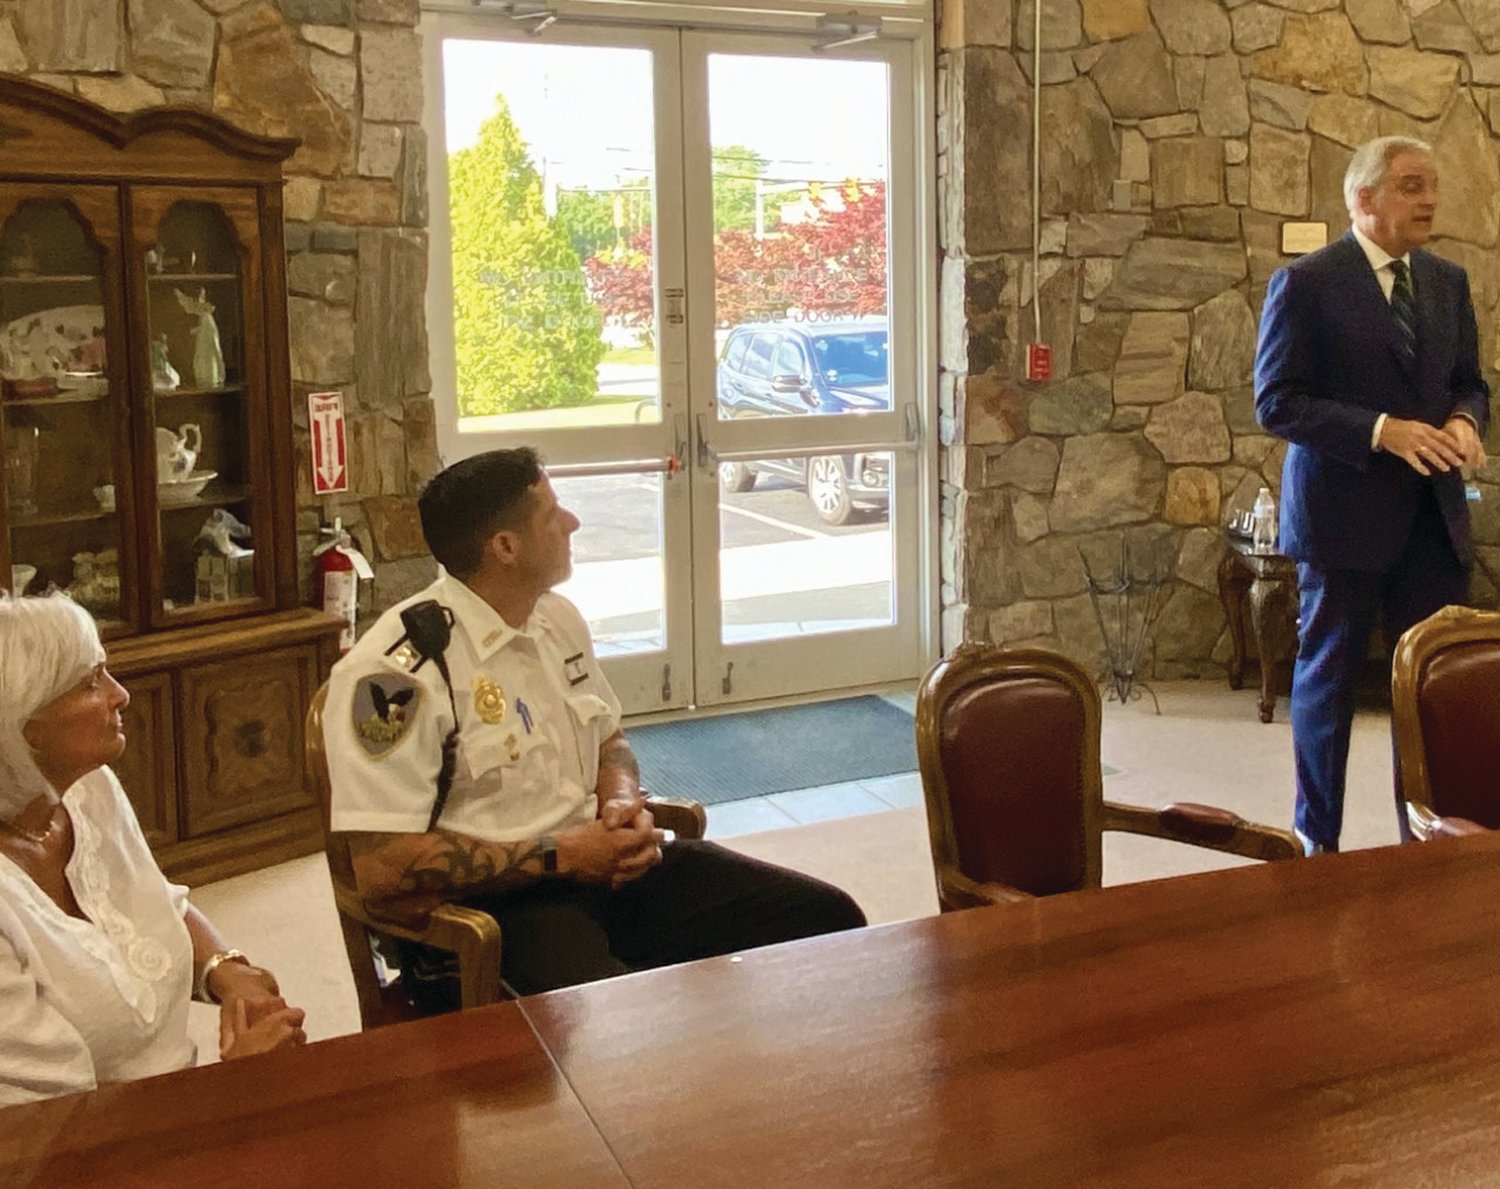 IMPORTANT ISSUES: Johnston Town Councilwomen Lauren Garzone and JPD Captain Mike Babbitt explain about the importance of the District 2 Neighborhood Watch committee during his recent and special visit.